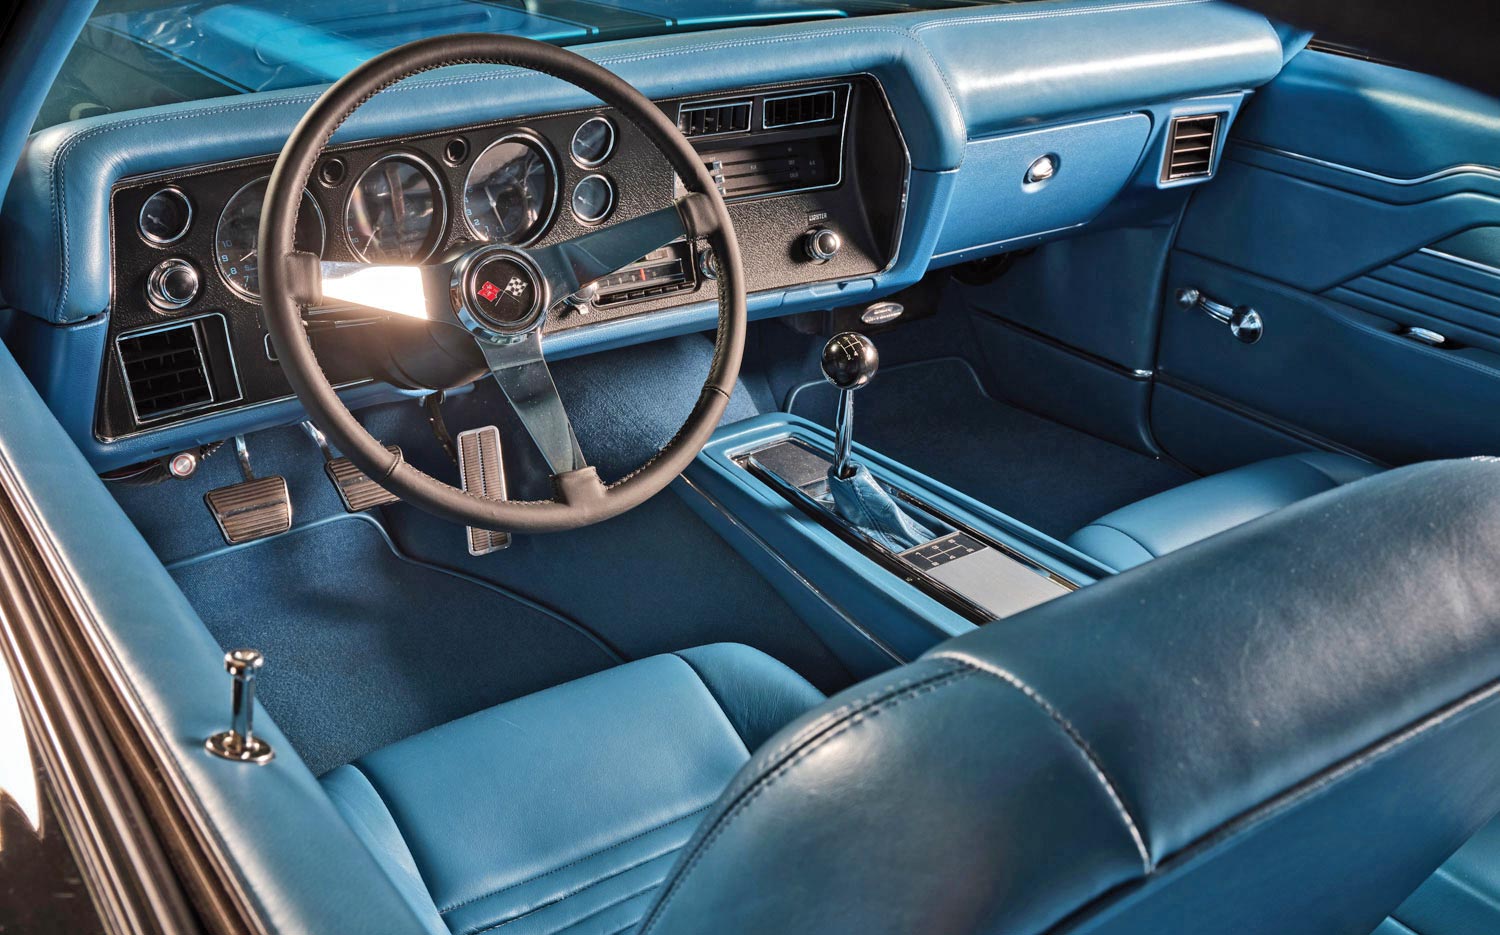 poweder blue classic car front interior, with a view of the steering wheel and dashboard gauges